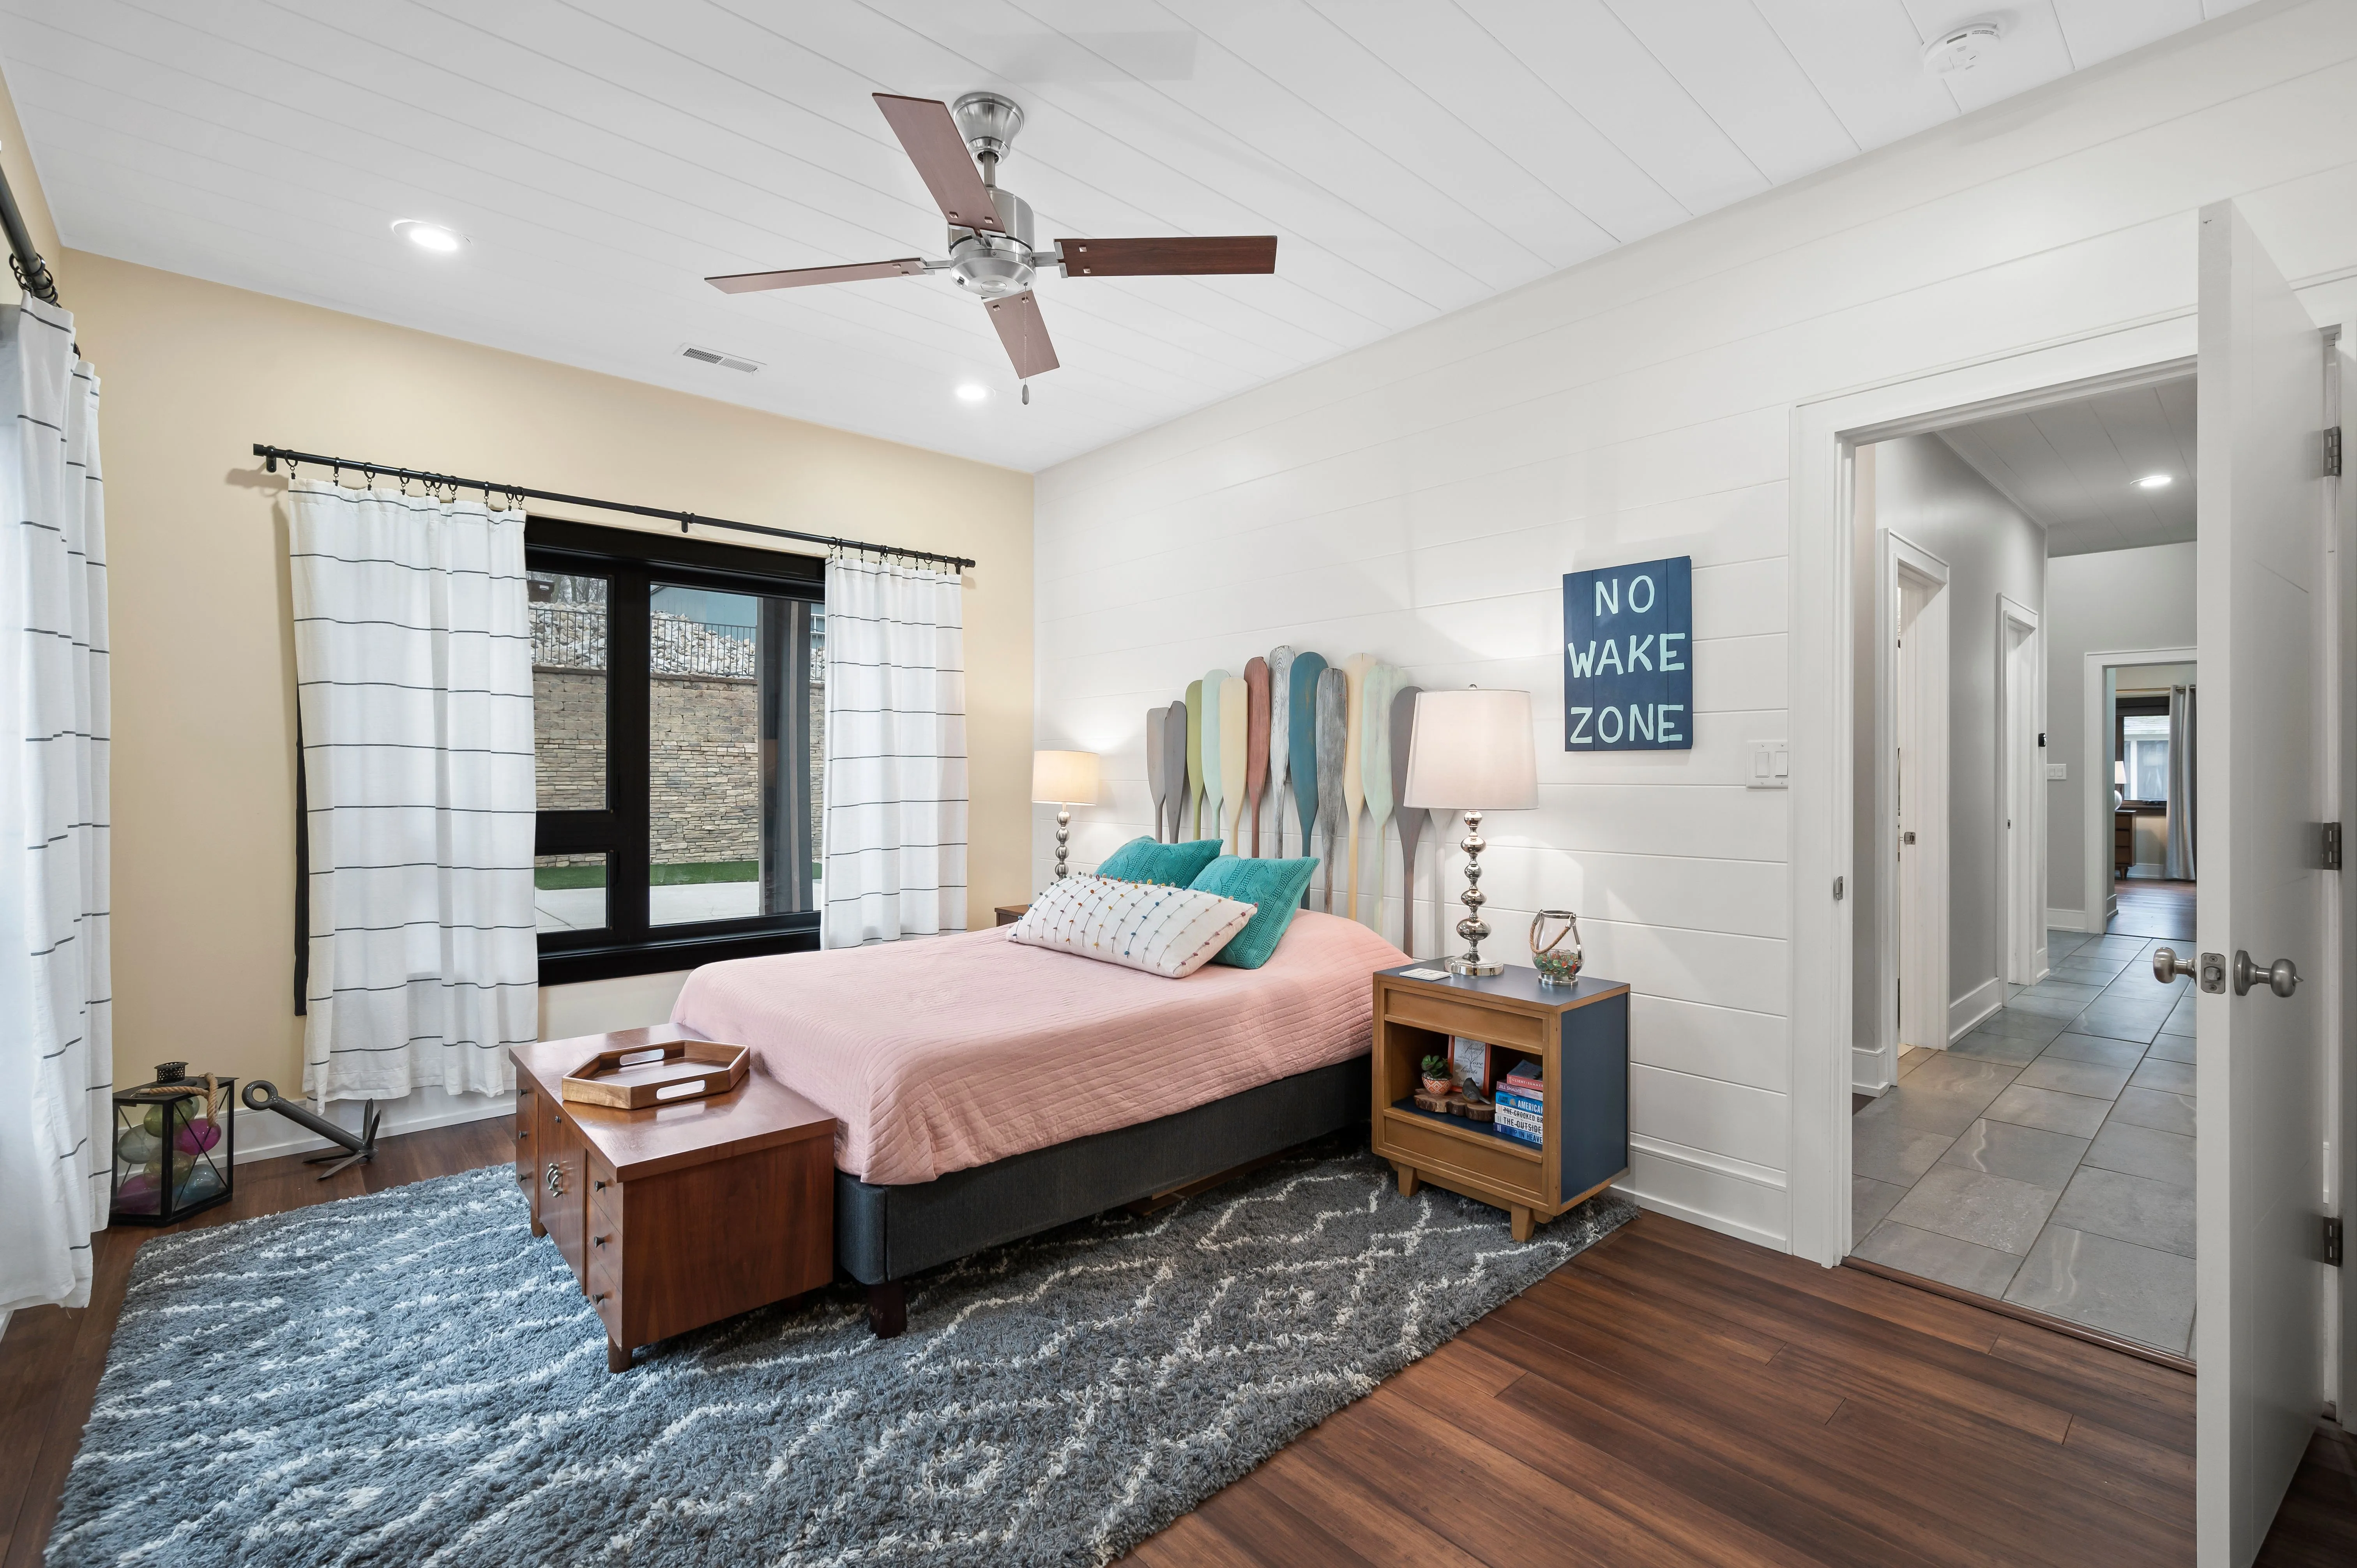 Bright and modern bedroom interior with a queen-sized bed, ceiling fan, hardwood floors, and a decorative area rug. The room features a large window with curtains, bedside tables with lamps, and wall art. A hallway entrance is visible on the right.